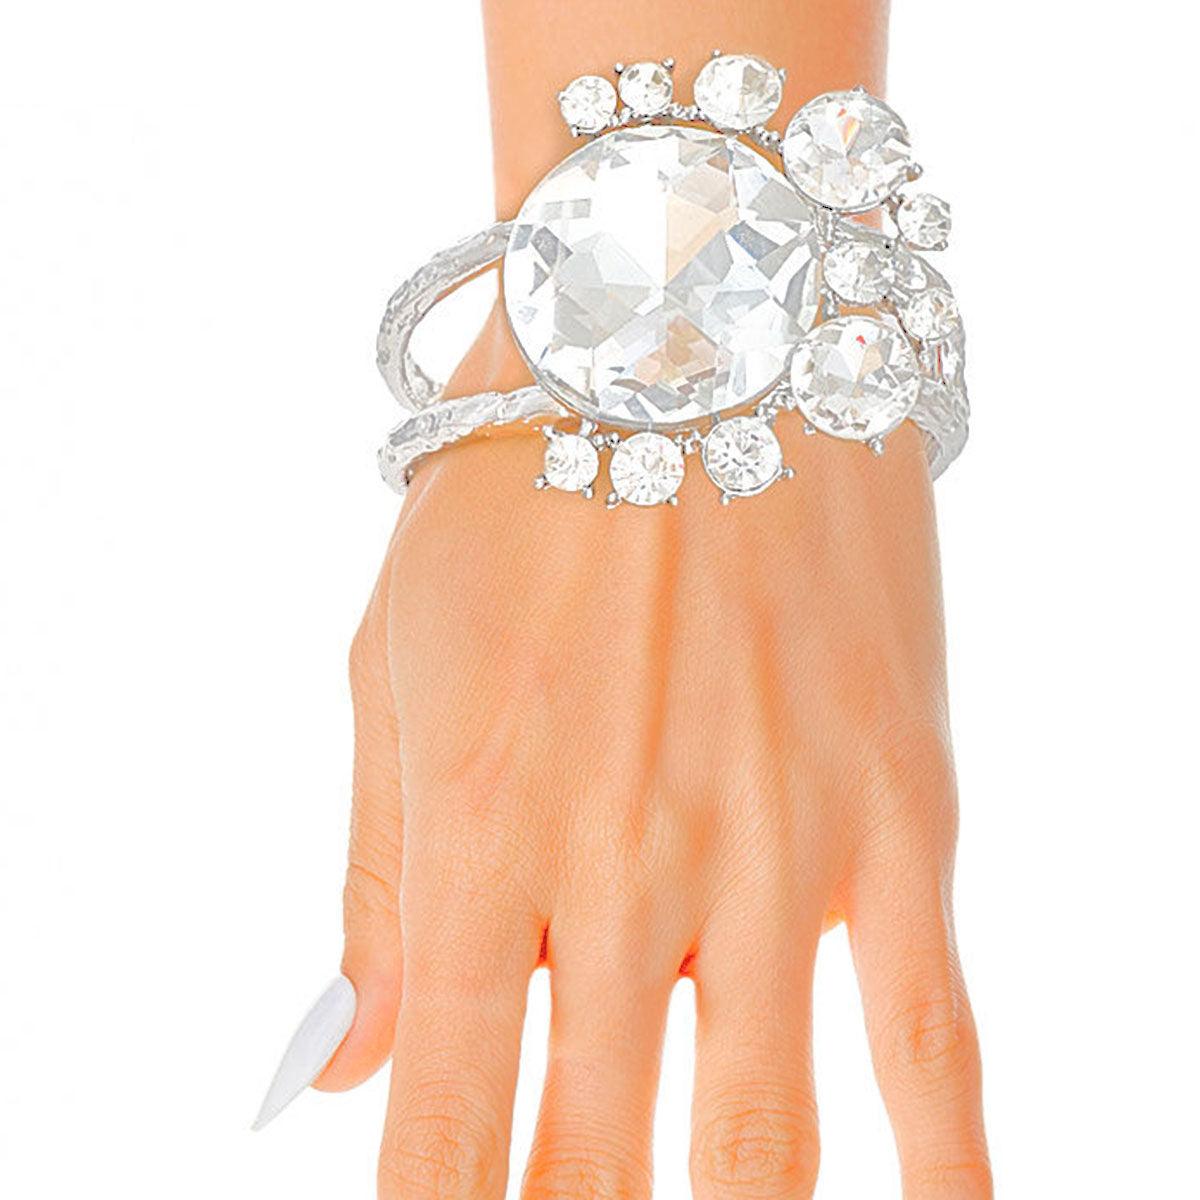 Make a Statement: Must-Have Clear/Silver Cuff Bracelet for a Blissful Wrist